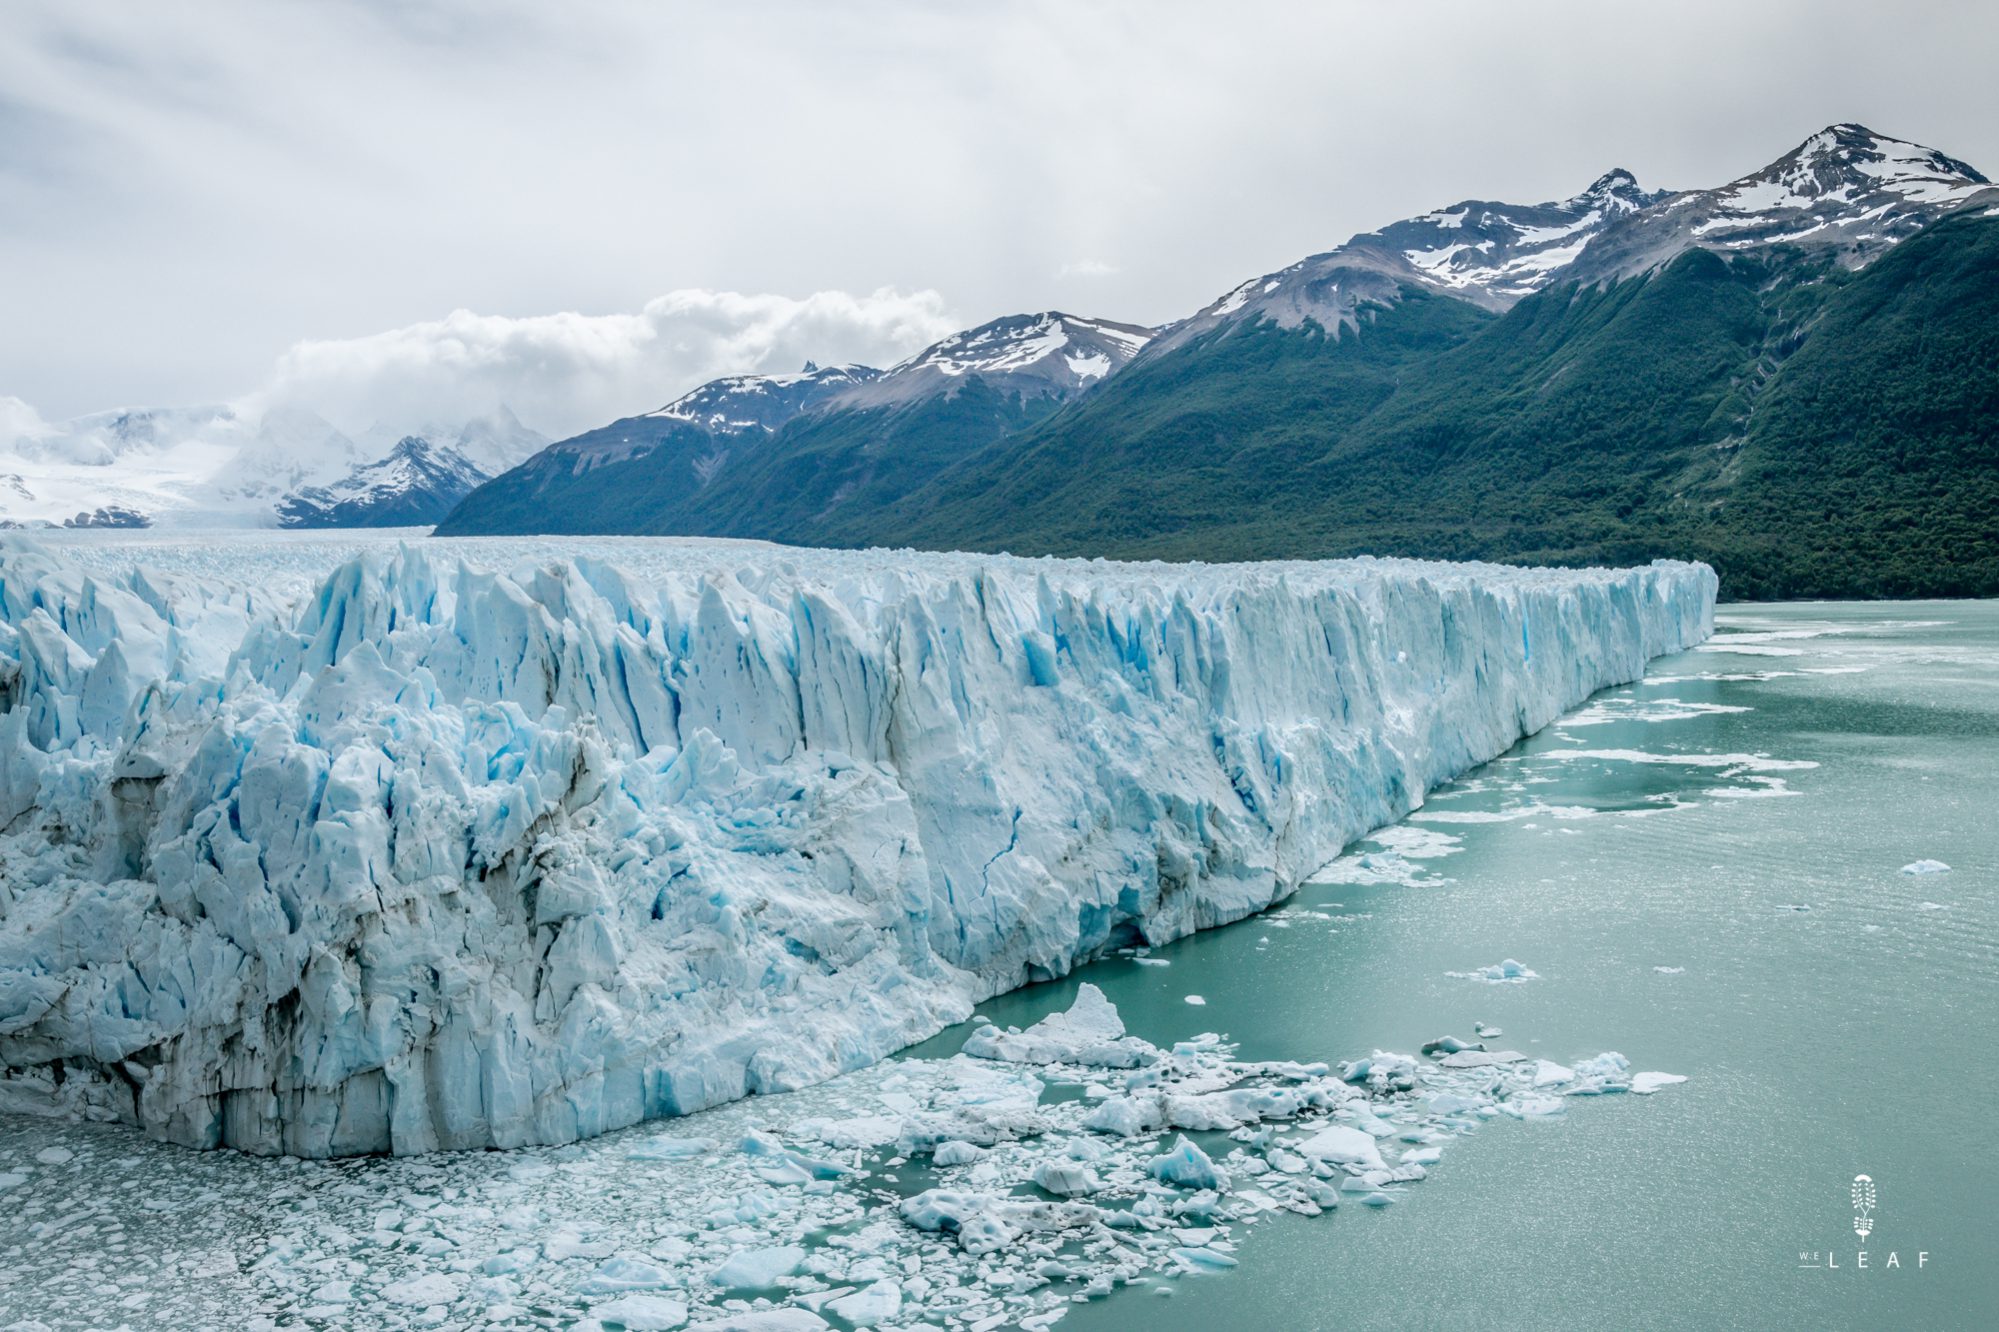 22 photos to inspire you to visit Argentina